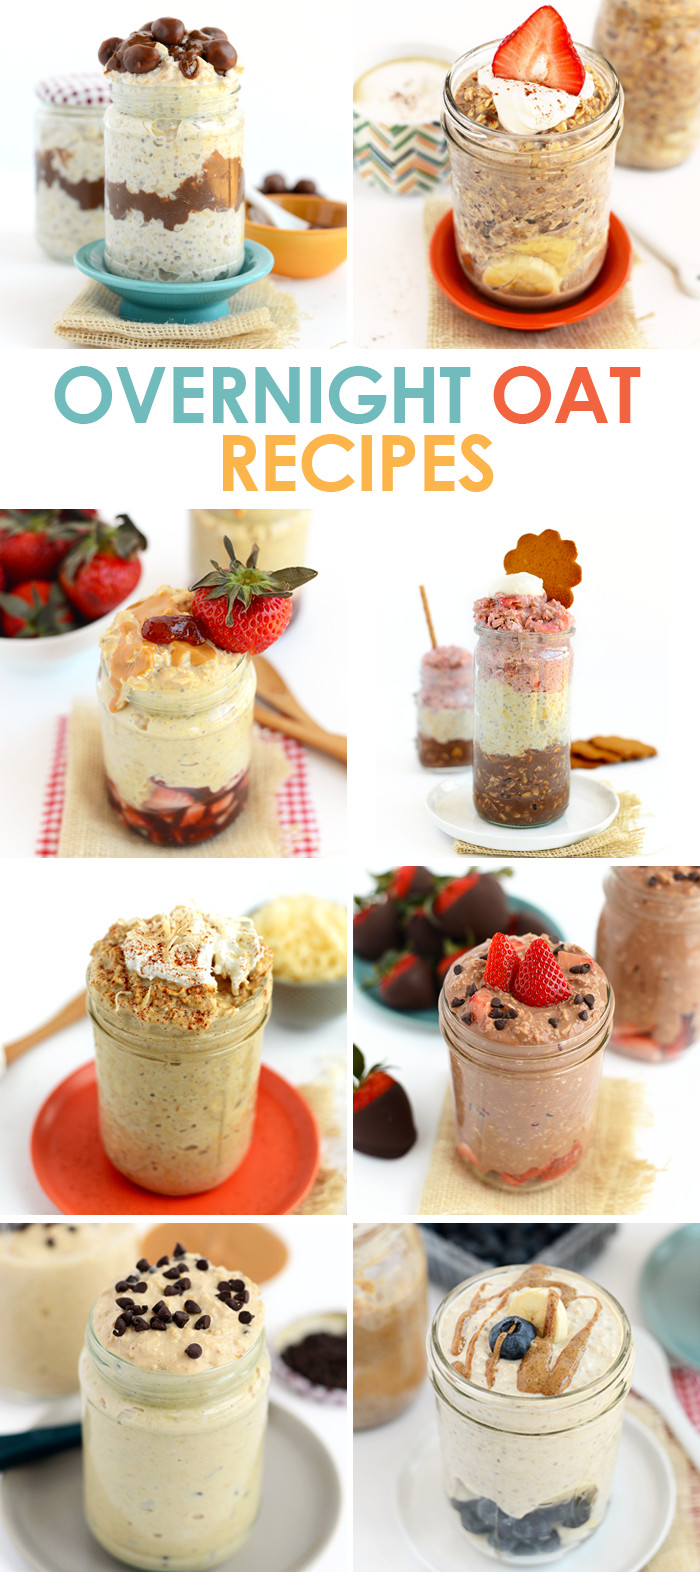 Overnight Oats Recipes Healthy
 8 Ways to Eat Overnight Oats Fit Foo Finds